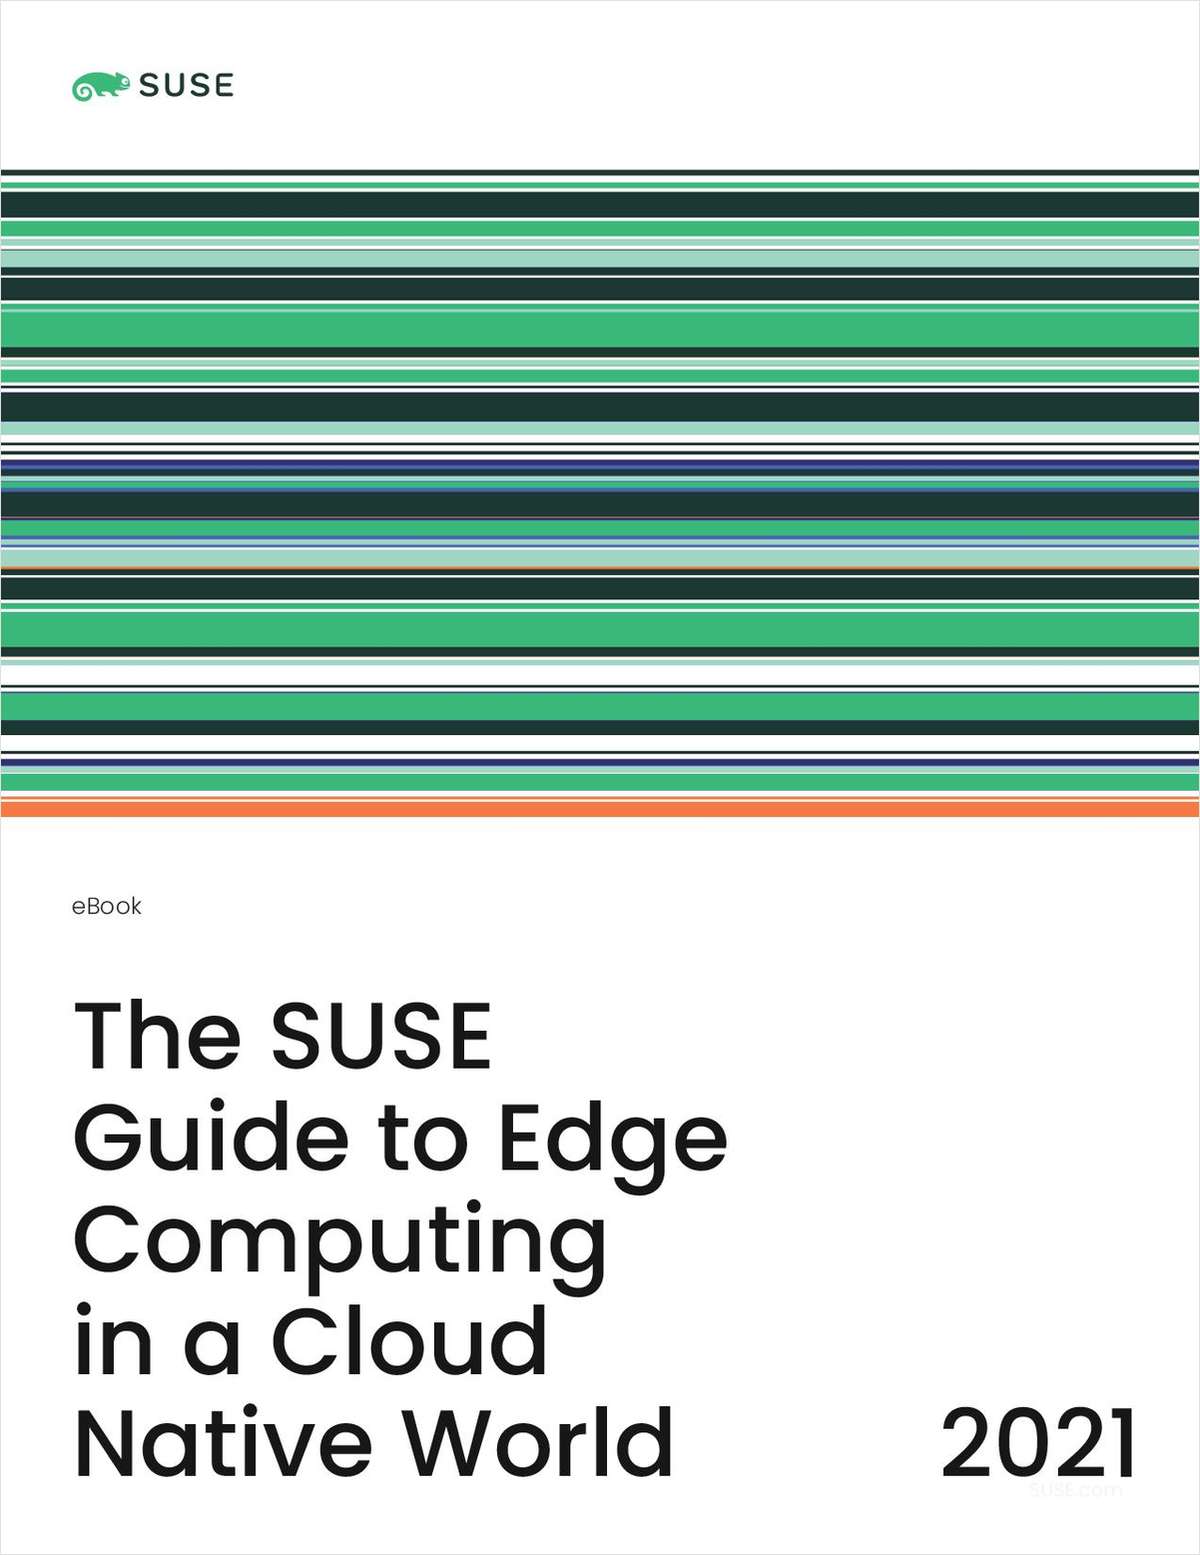 The SUSE Guide to Edge Computing in a Cloud Native World